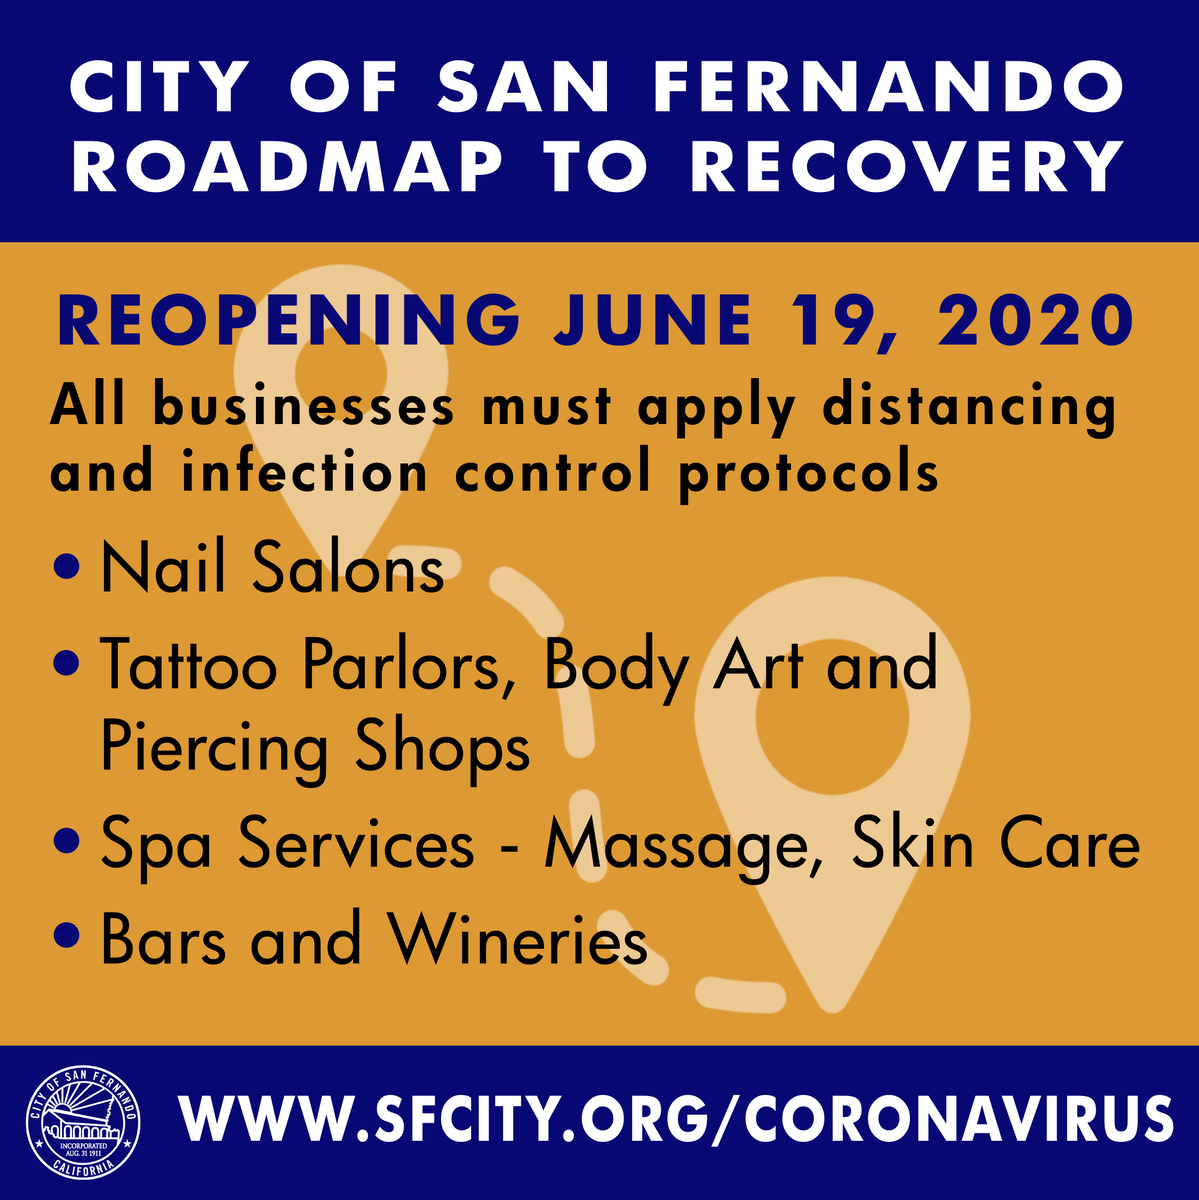 Recovery continues! Nail Salons, Tattoo Parlors, Body Art, Piercing Shops, Spa Services, Bars, Wineries, and Brewery Rooms are now allowed to open, with conditions. ow.ly/X84g50AcNBh #StayHealthySanFernando #WeAreInThisTogether #iLuvSanFernando